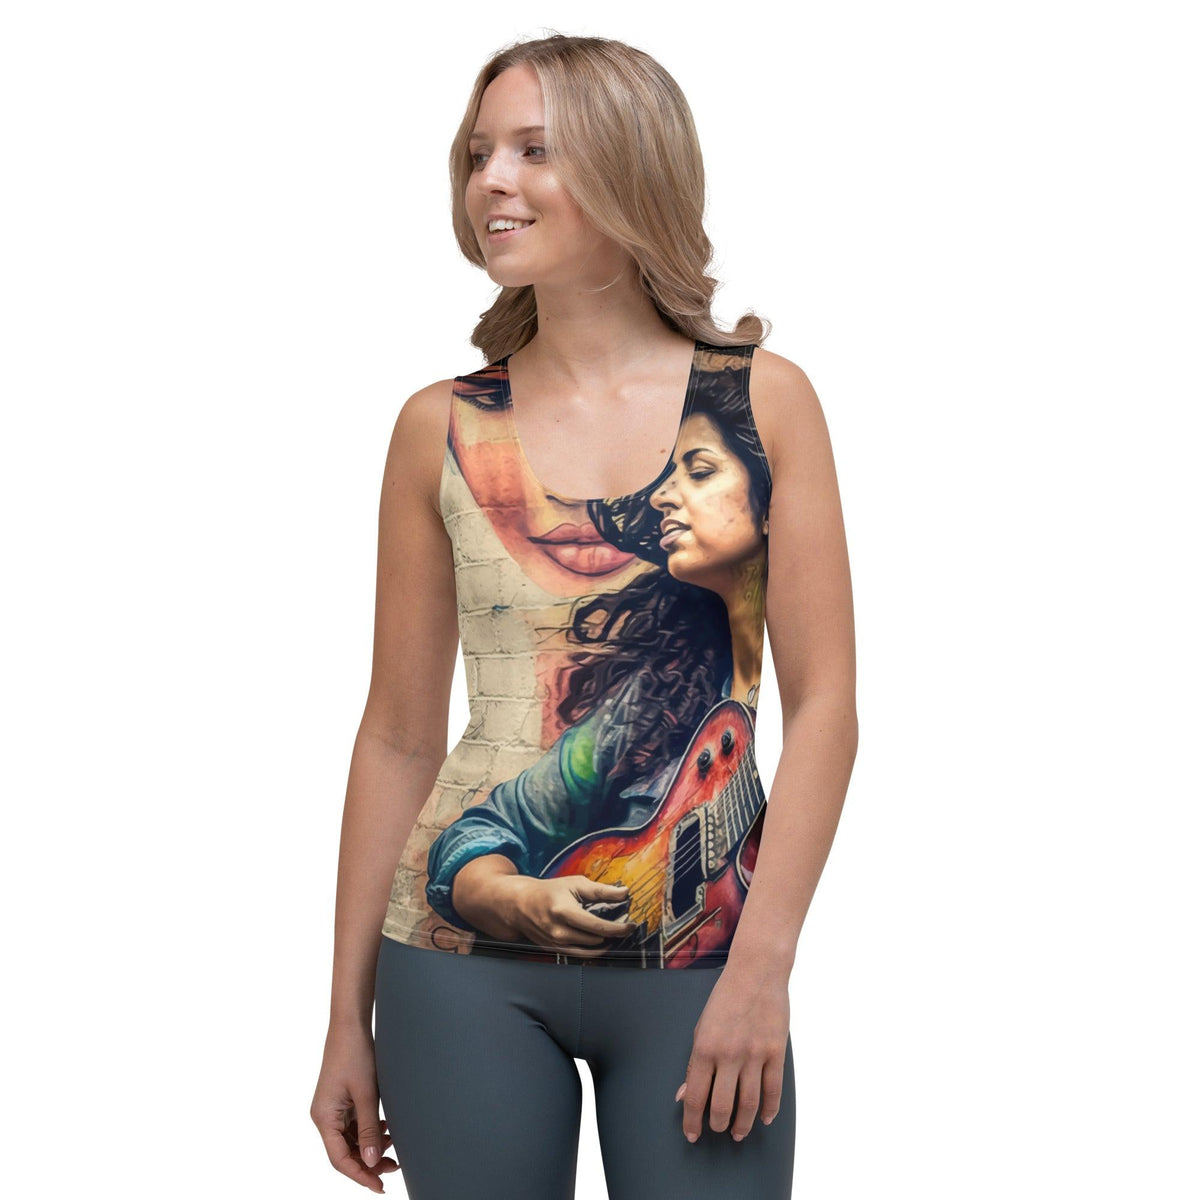 Guitar Speaks Her Language Sublimation Cut & Sew Tank Top - Beyond T-shirts